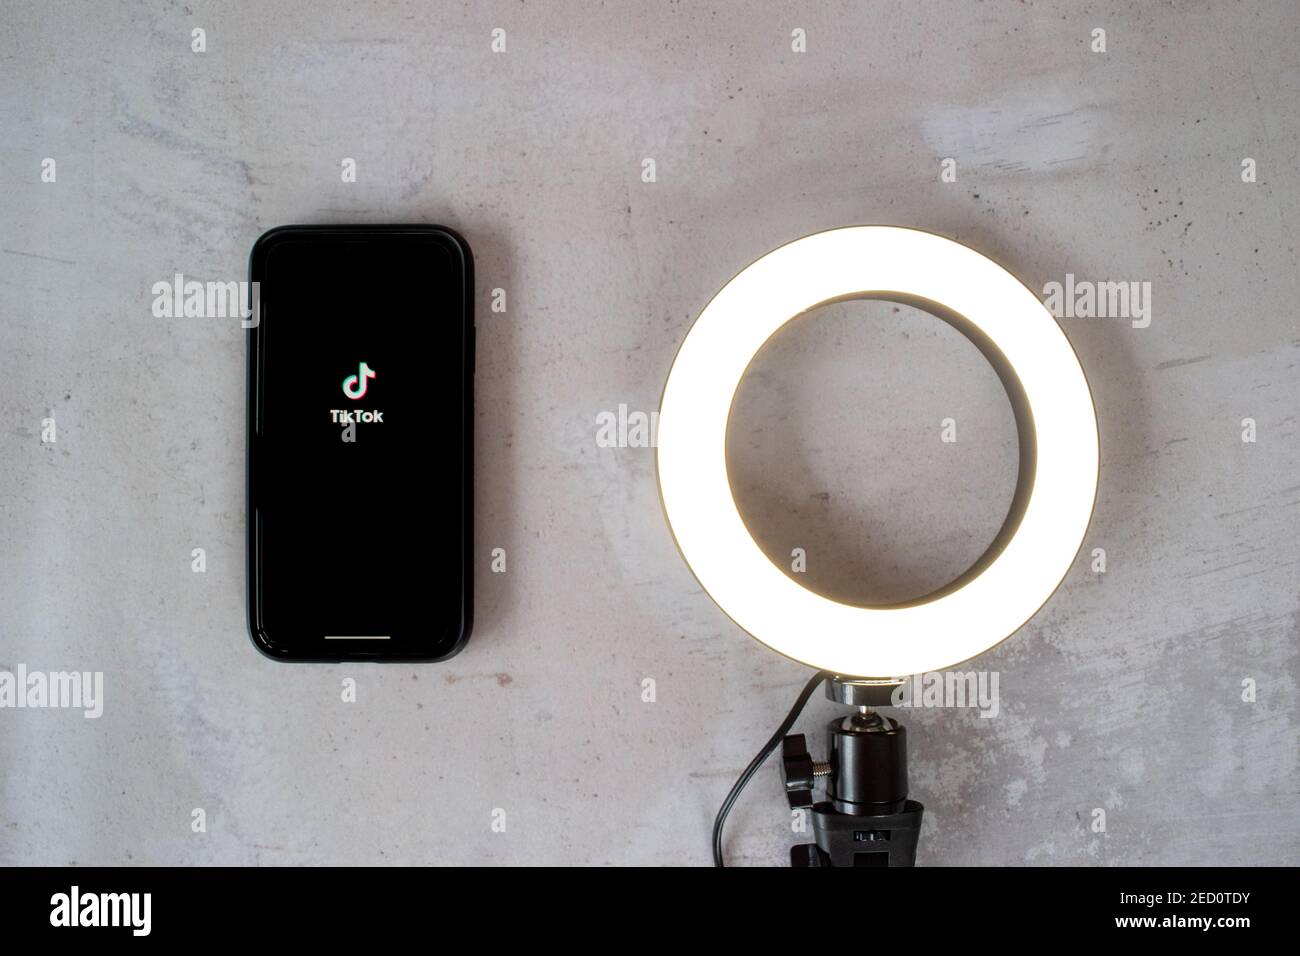 London, United Kingdom - February 14, 2021: iPhone showing the popular social media app Tik Tok with a camera ring light on a stone background. Stock Photo